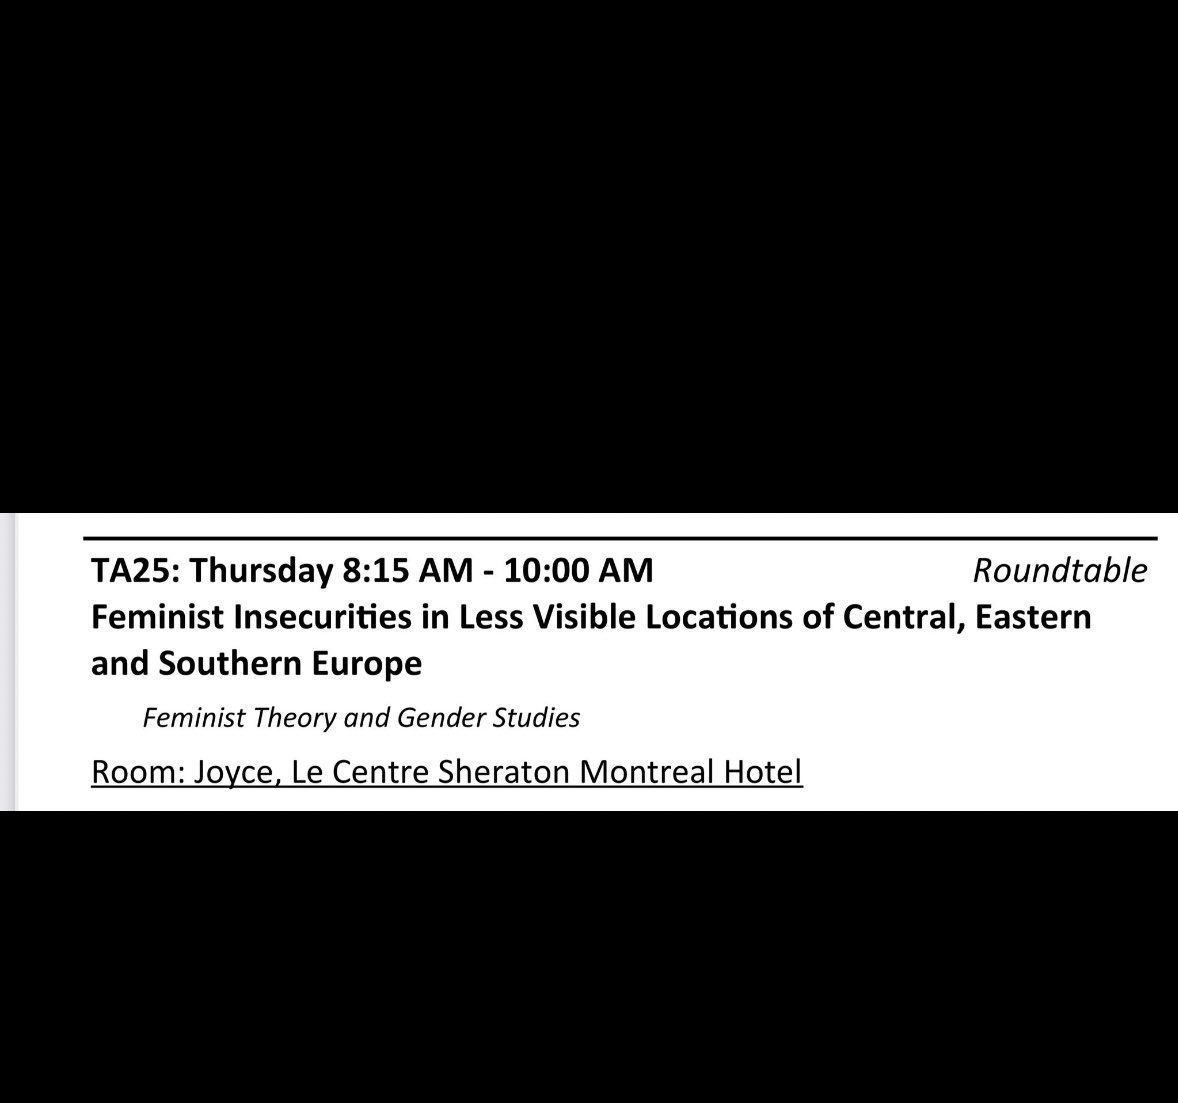 Our tomorrow’s roundtable will focus on #feminist #insecurities in Central, Eastern and Southern Europe and issues of #knowledgeproduction. Join @MilaOSullivan @b_santoire @PigaGraziella Dr Tetiana Kyselova and me to discuss these timely questions #ISA2023 @ftgs_isa